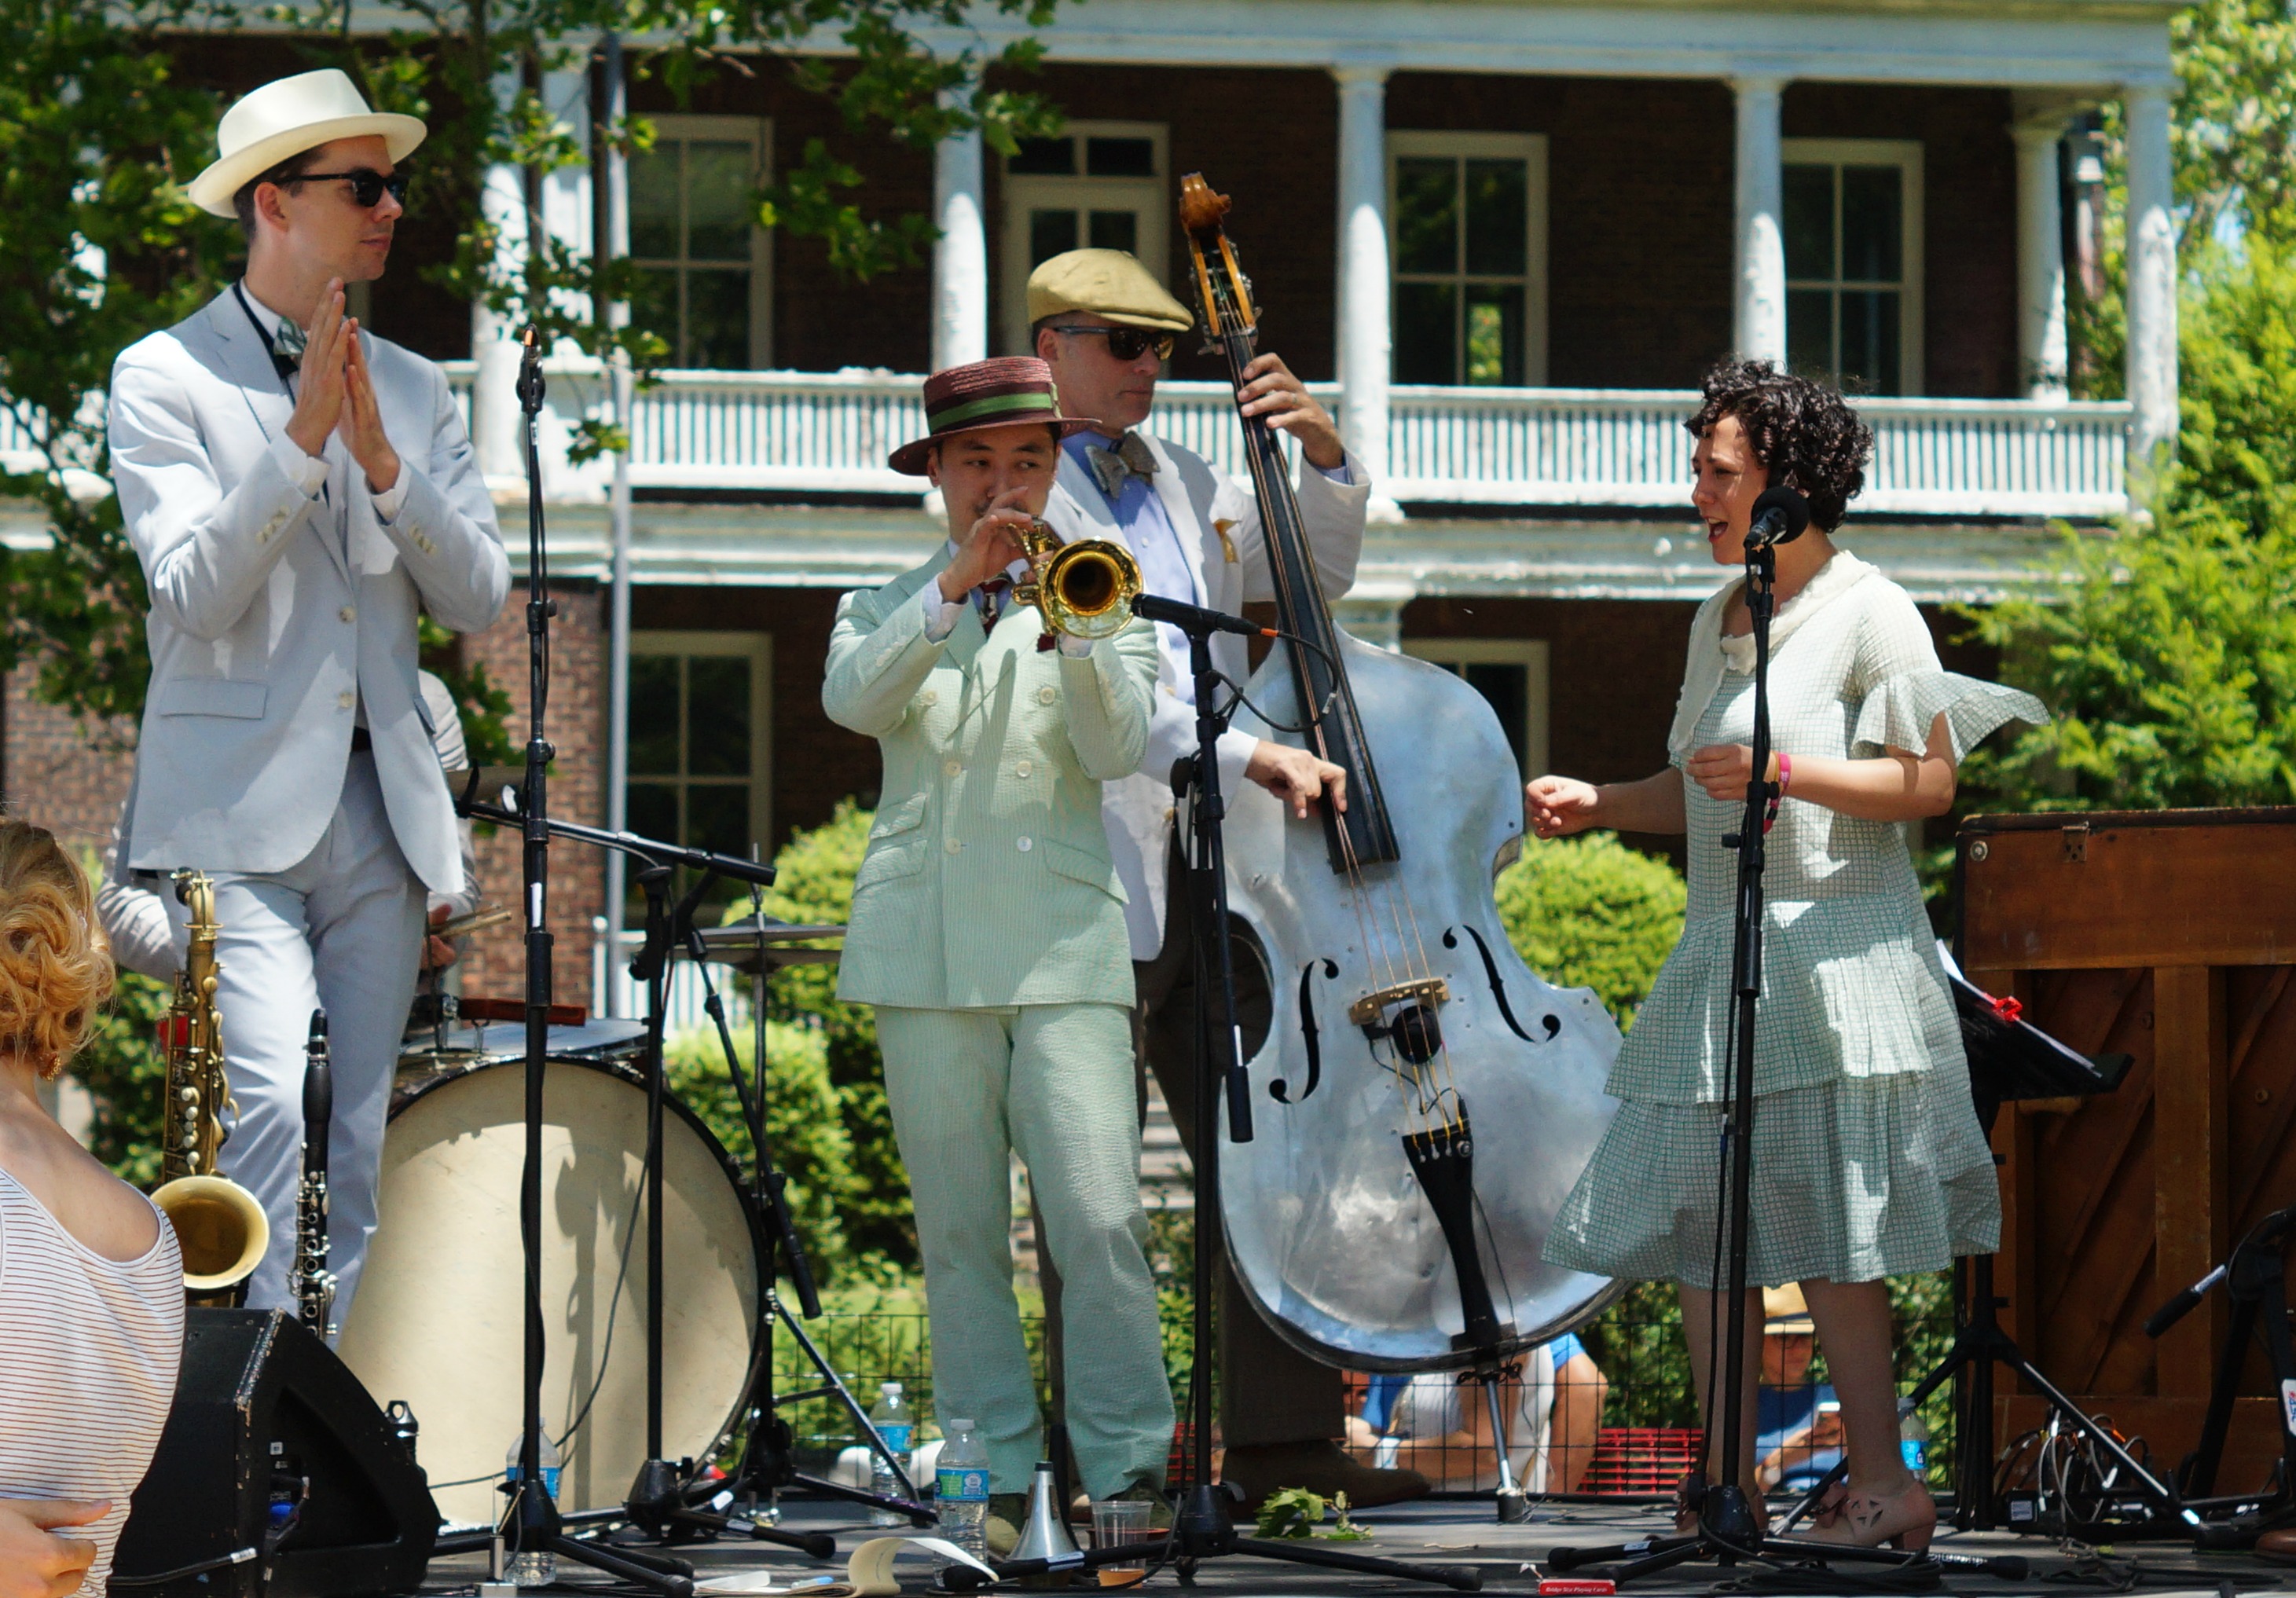 jazz-age-lawn-party-6